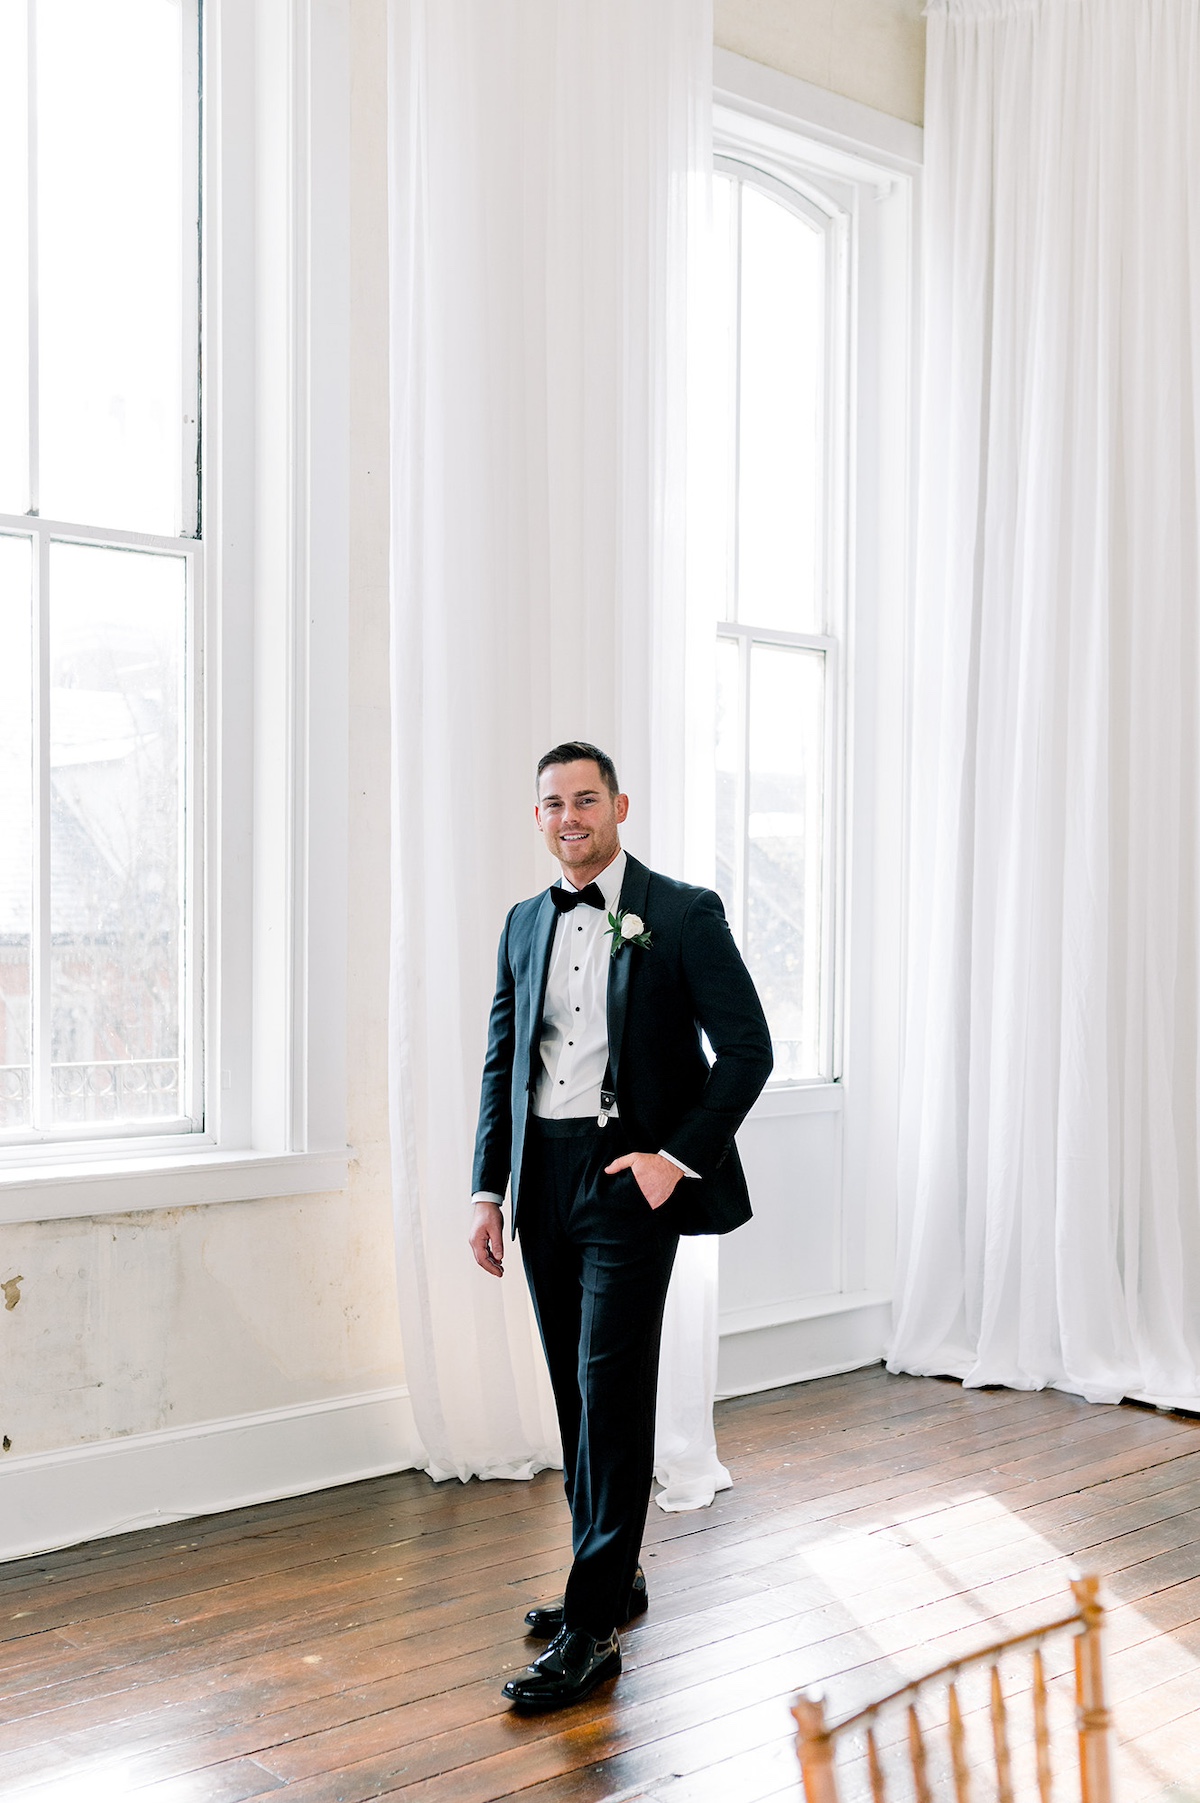 Editorial capture of the groom in a moment of joyful celebration, adding an element of festivity and high-end charm to the occasion.